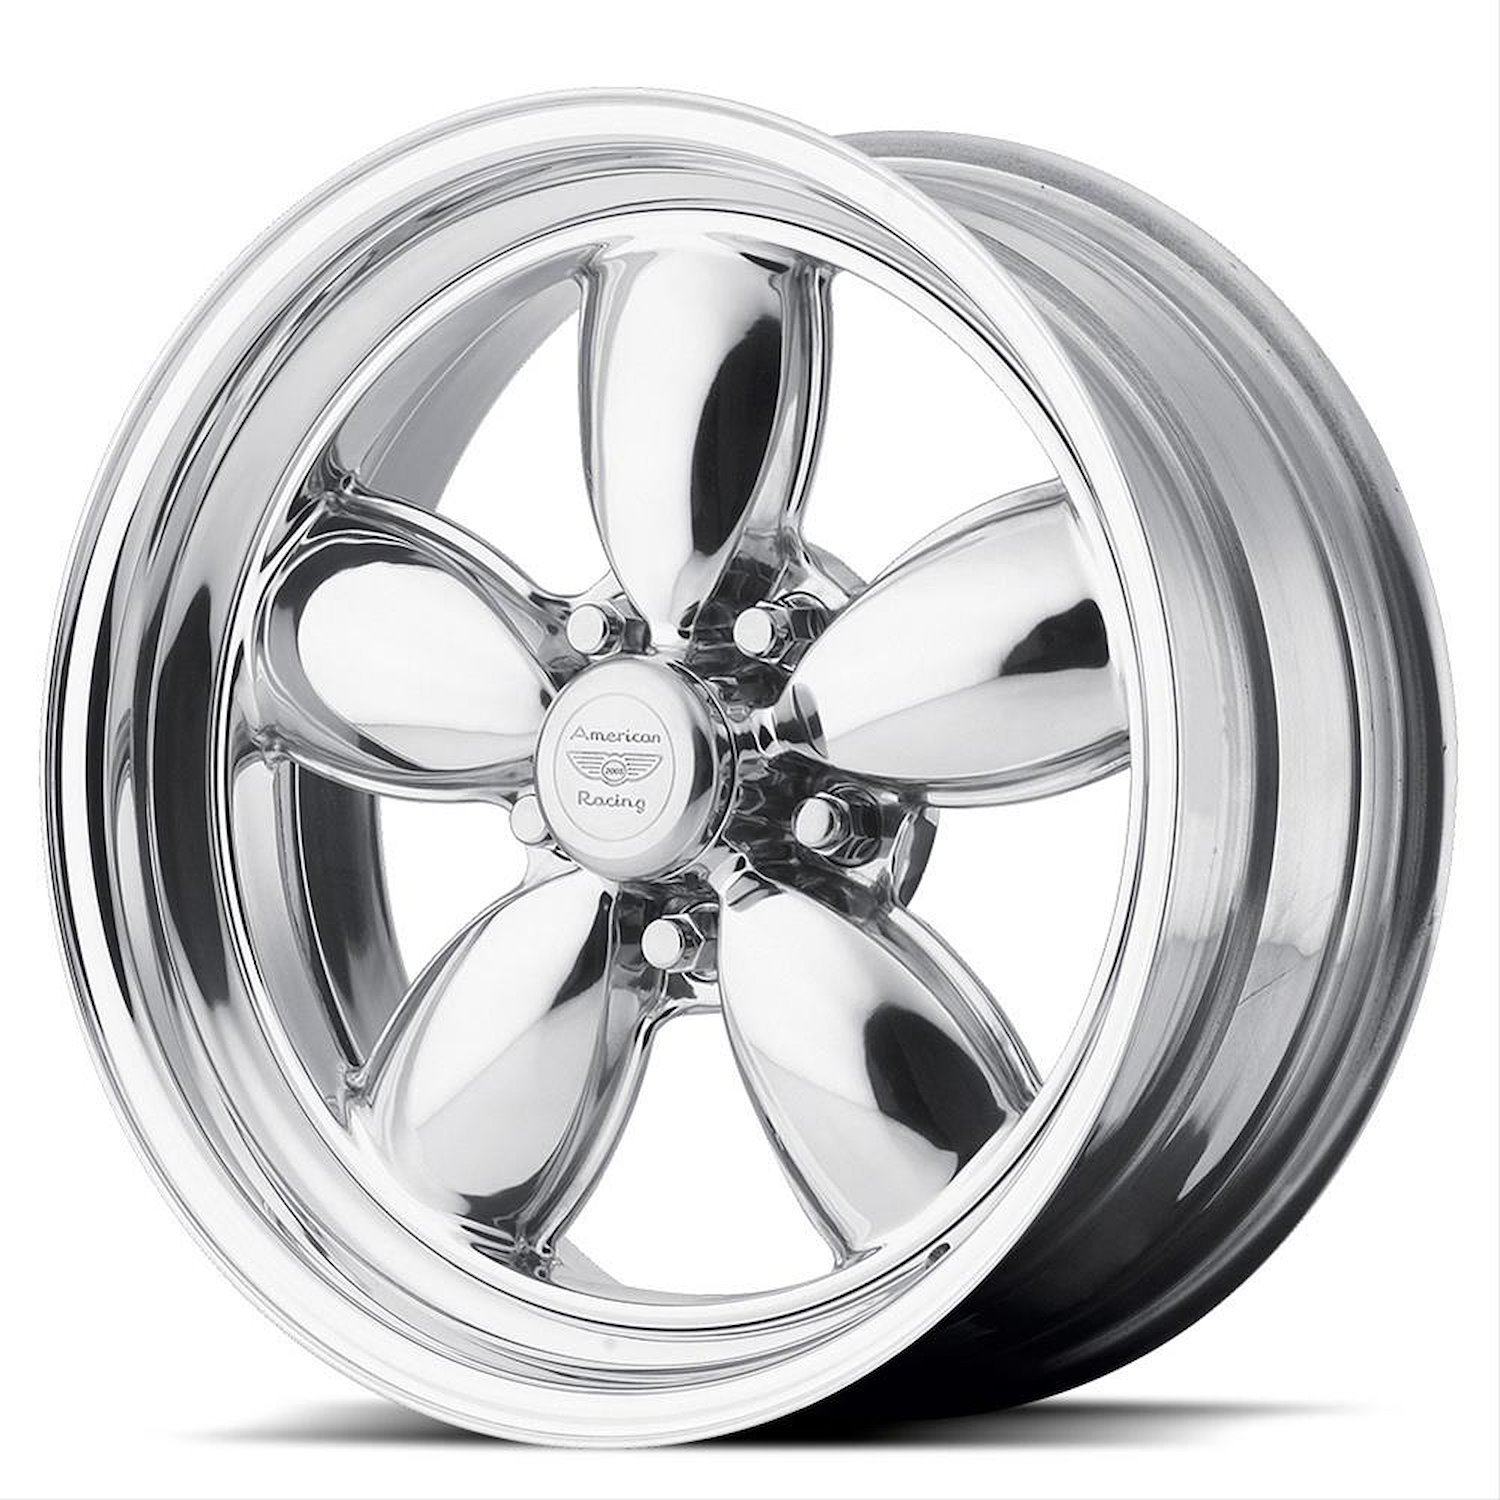 AMERICAN RACING CLASSIC 200S TWO-PIECE POLISHED 15 x 8 5x4.5 -13 3.99